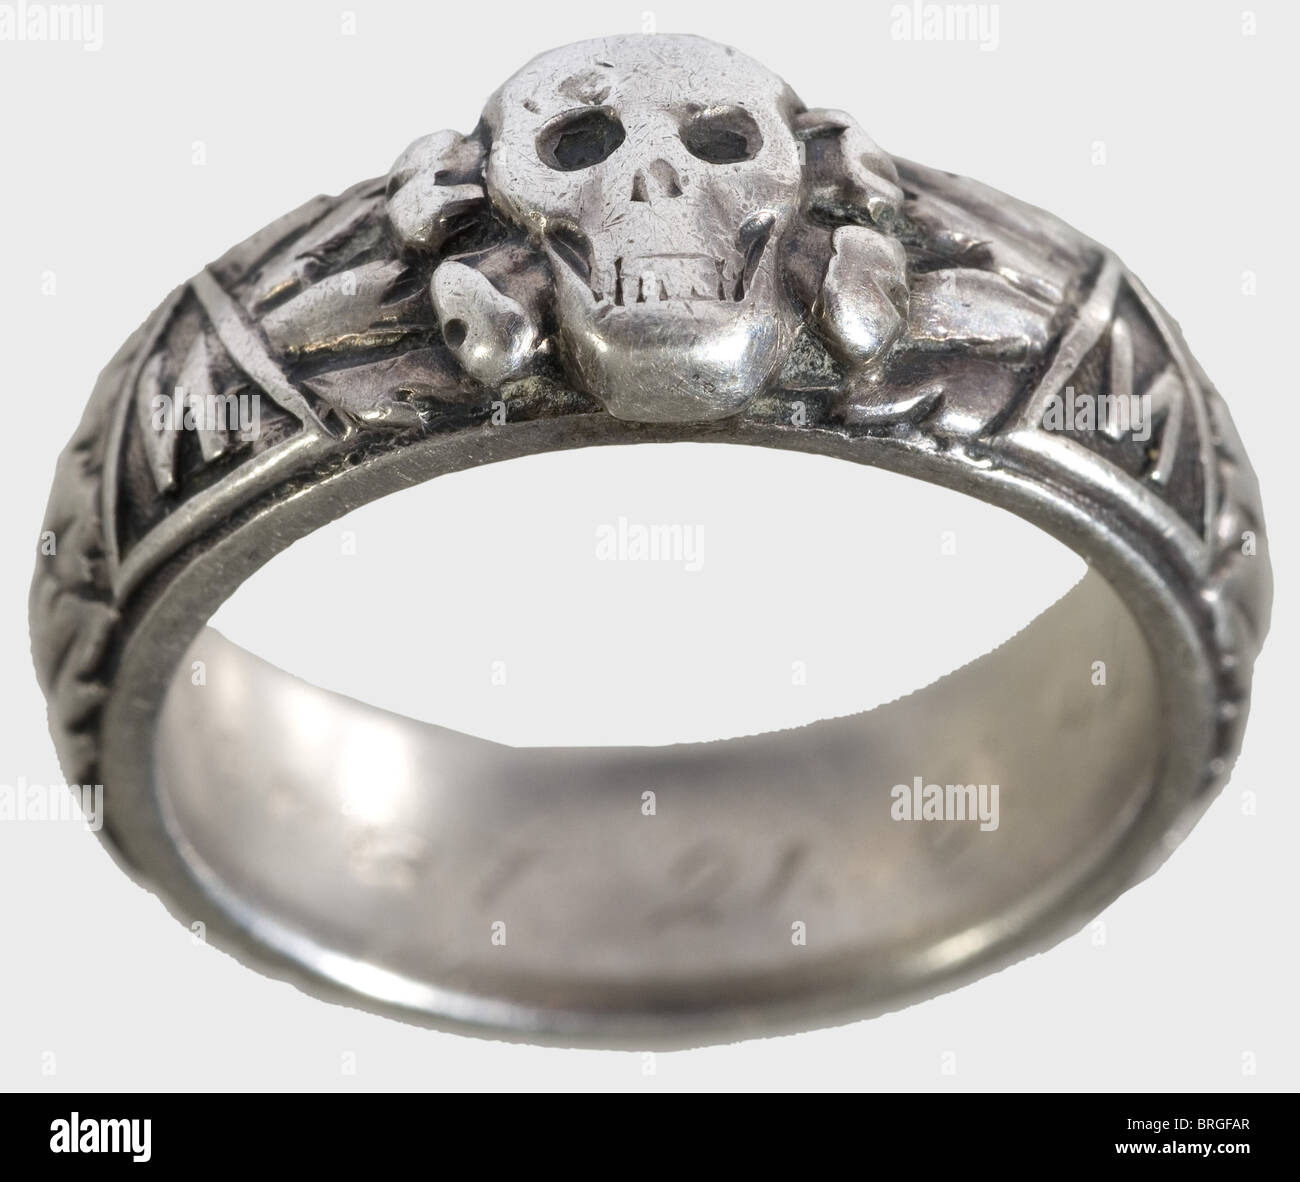 A SS death's-head ring,and a heraldic ring of the Estonian Legion Silver,custom-made issue of the jeweller Gahr in Munich with separately soldered-on death's head. On the inside surface the engraved dedication: 'S.lb. Wonerat 21.6.42. H. Himmler'. Included is a silver ring with a superimposed golden coat of arms of the Estonian Legion. Marks of fineness. Both rings with signs of wear and traces of acid cleaning. Weight 11.5 and 6.5 g respectively.,historic,historical,1930s,20th century,Waffen-SS,armed division of the SS,armed service,armed services,N,Additional-Rights-Clearences-Not Available Stock Photo